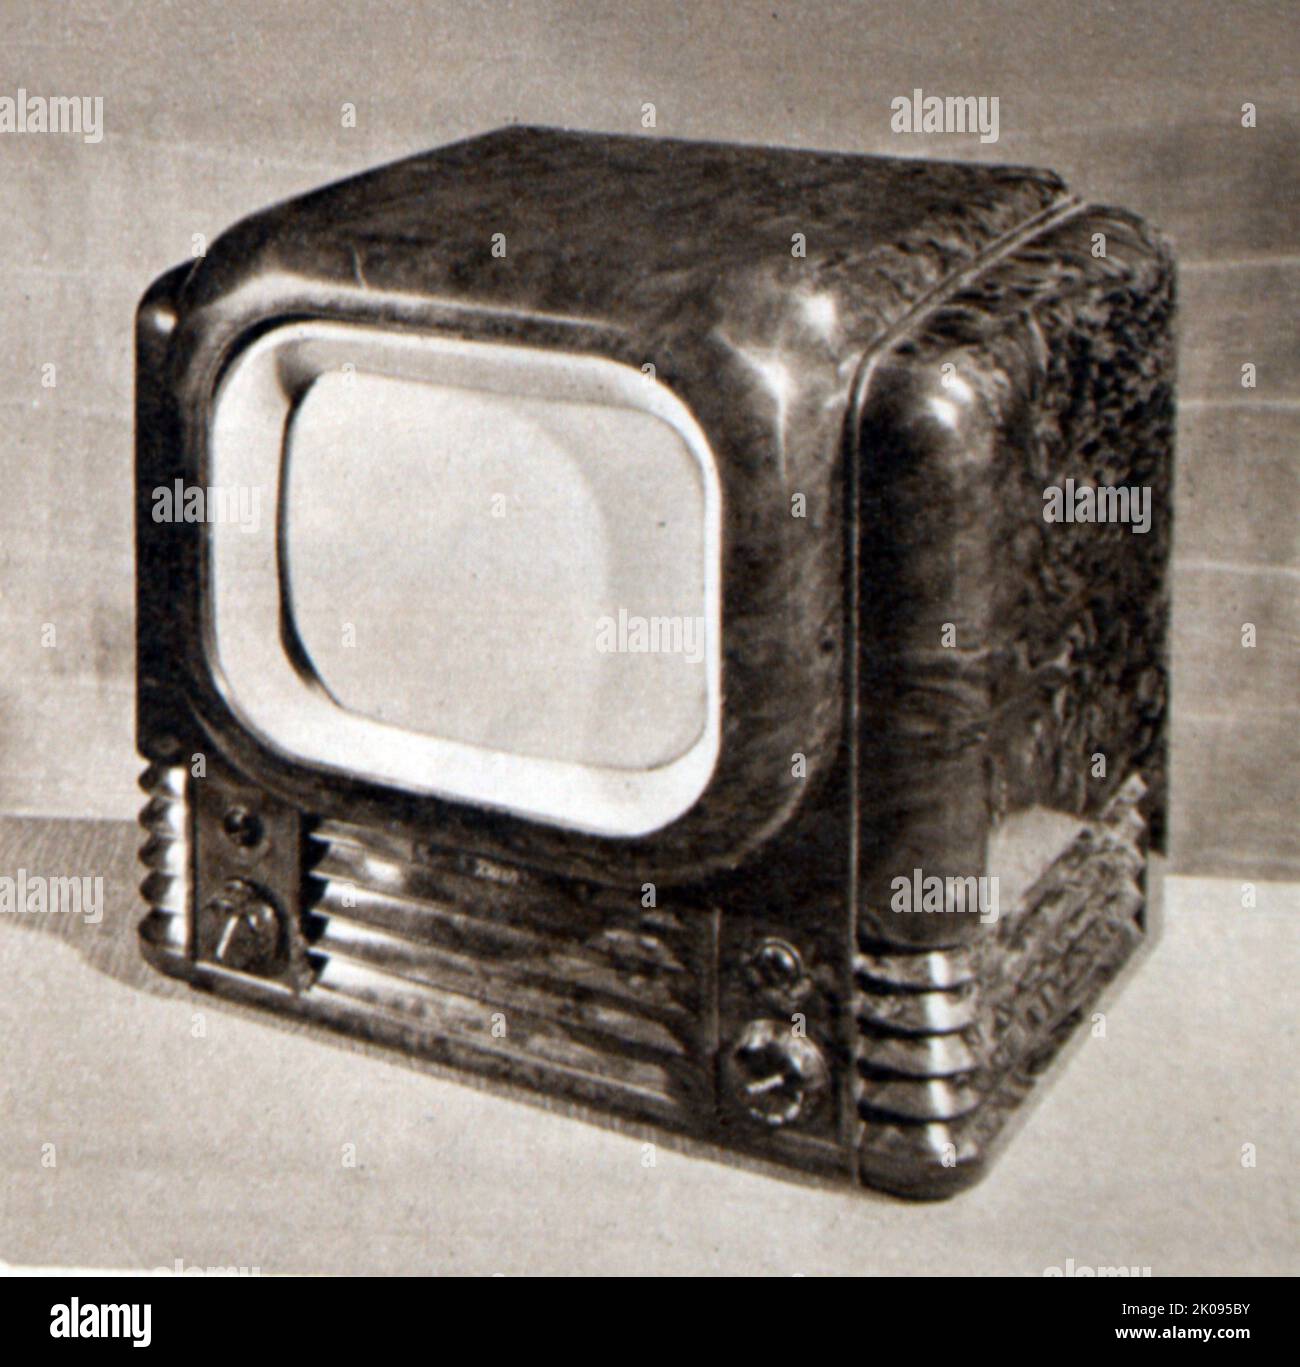 Bush television receiver in moulded plastic cabinet, made by British Moulded Plastics Ltd. Stock Photo